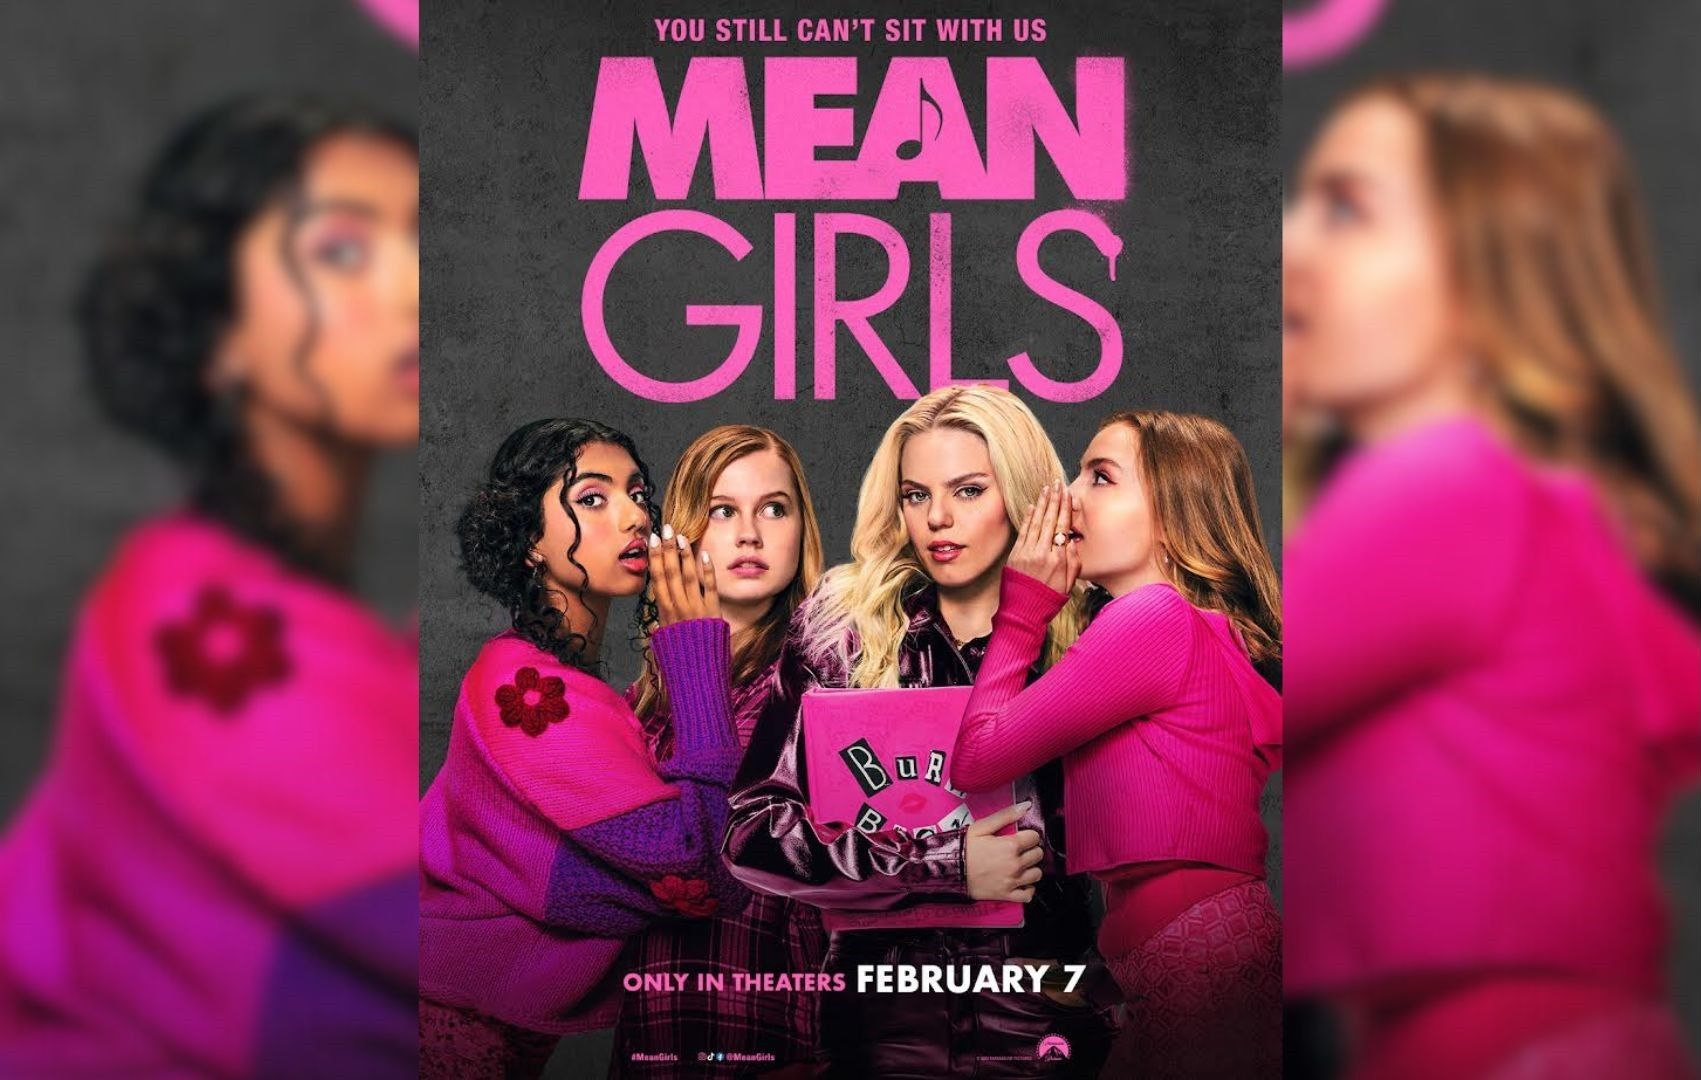 'Mean Girls' movie musical premiering on February 7